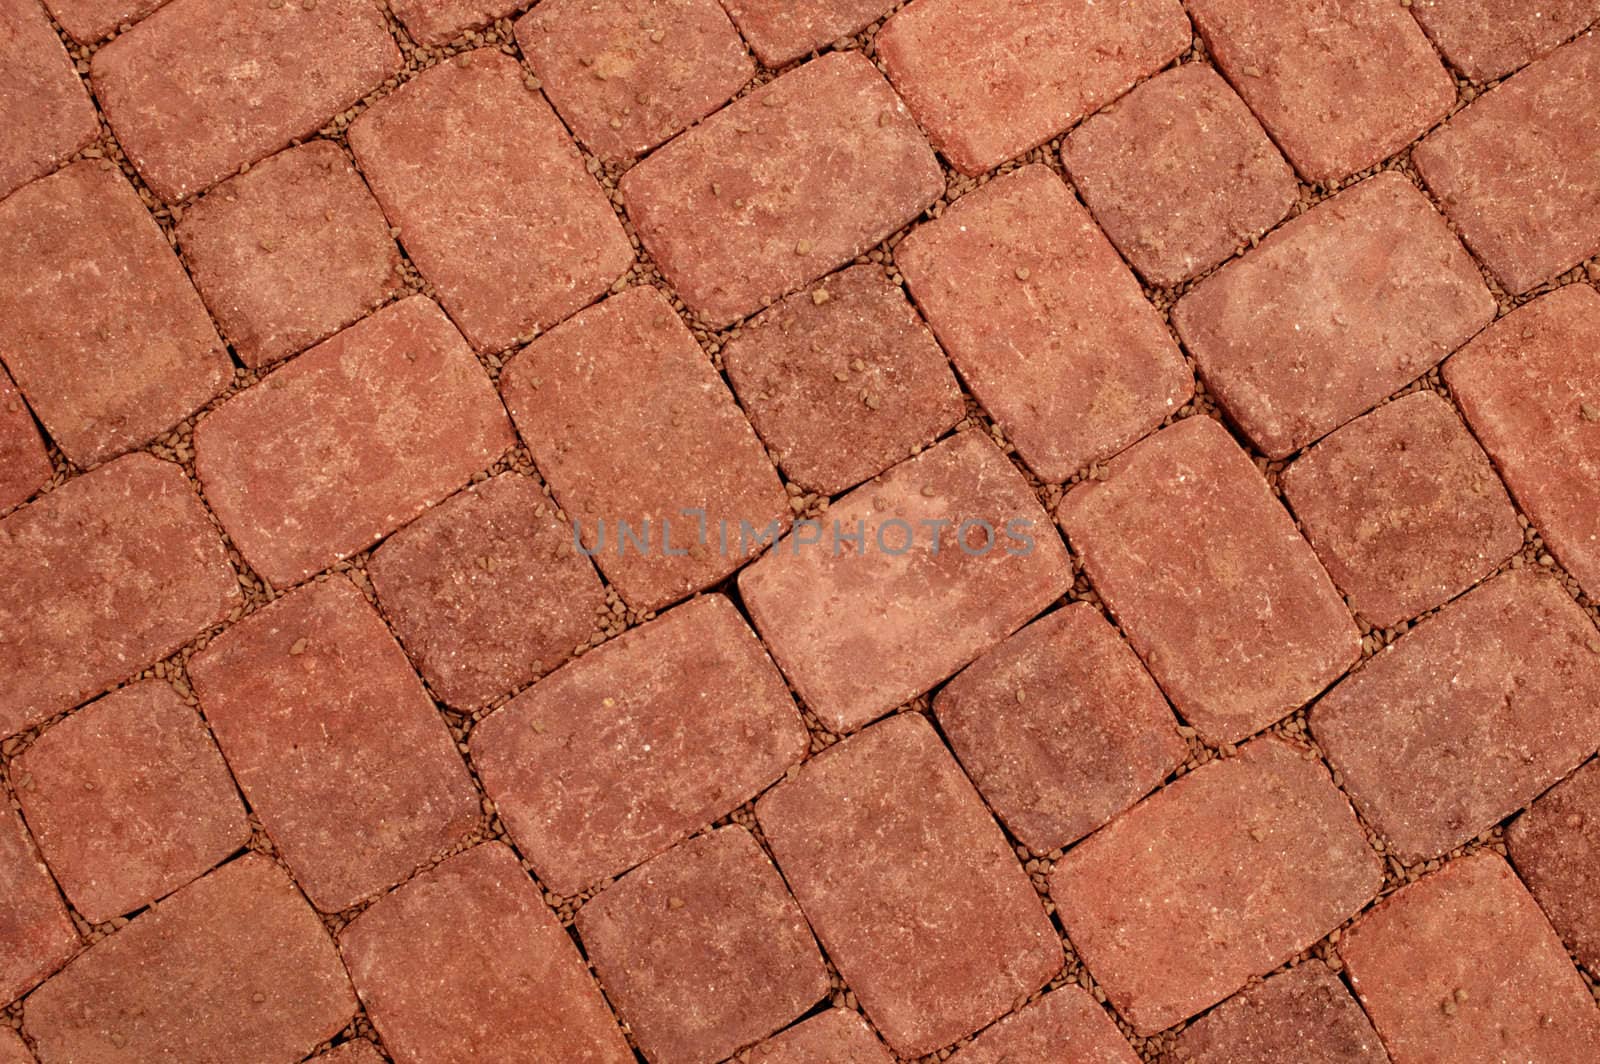 Close up of new brick paving in a yard. Suitable as background.